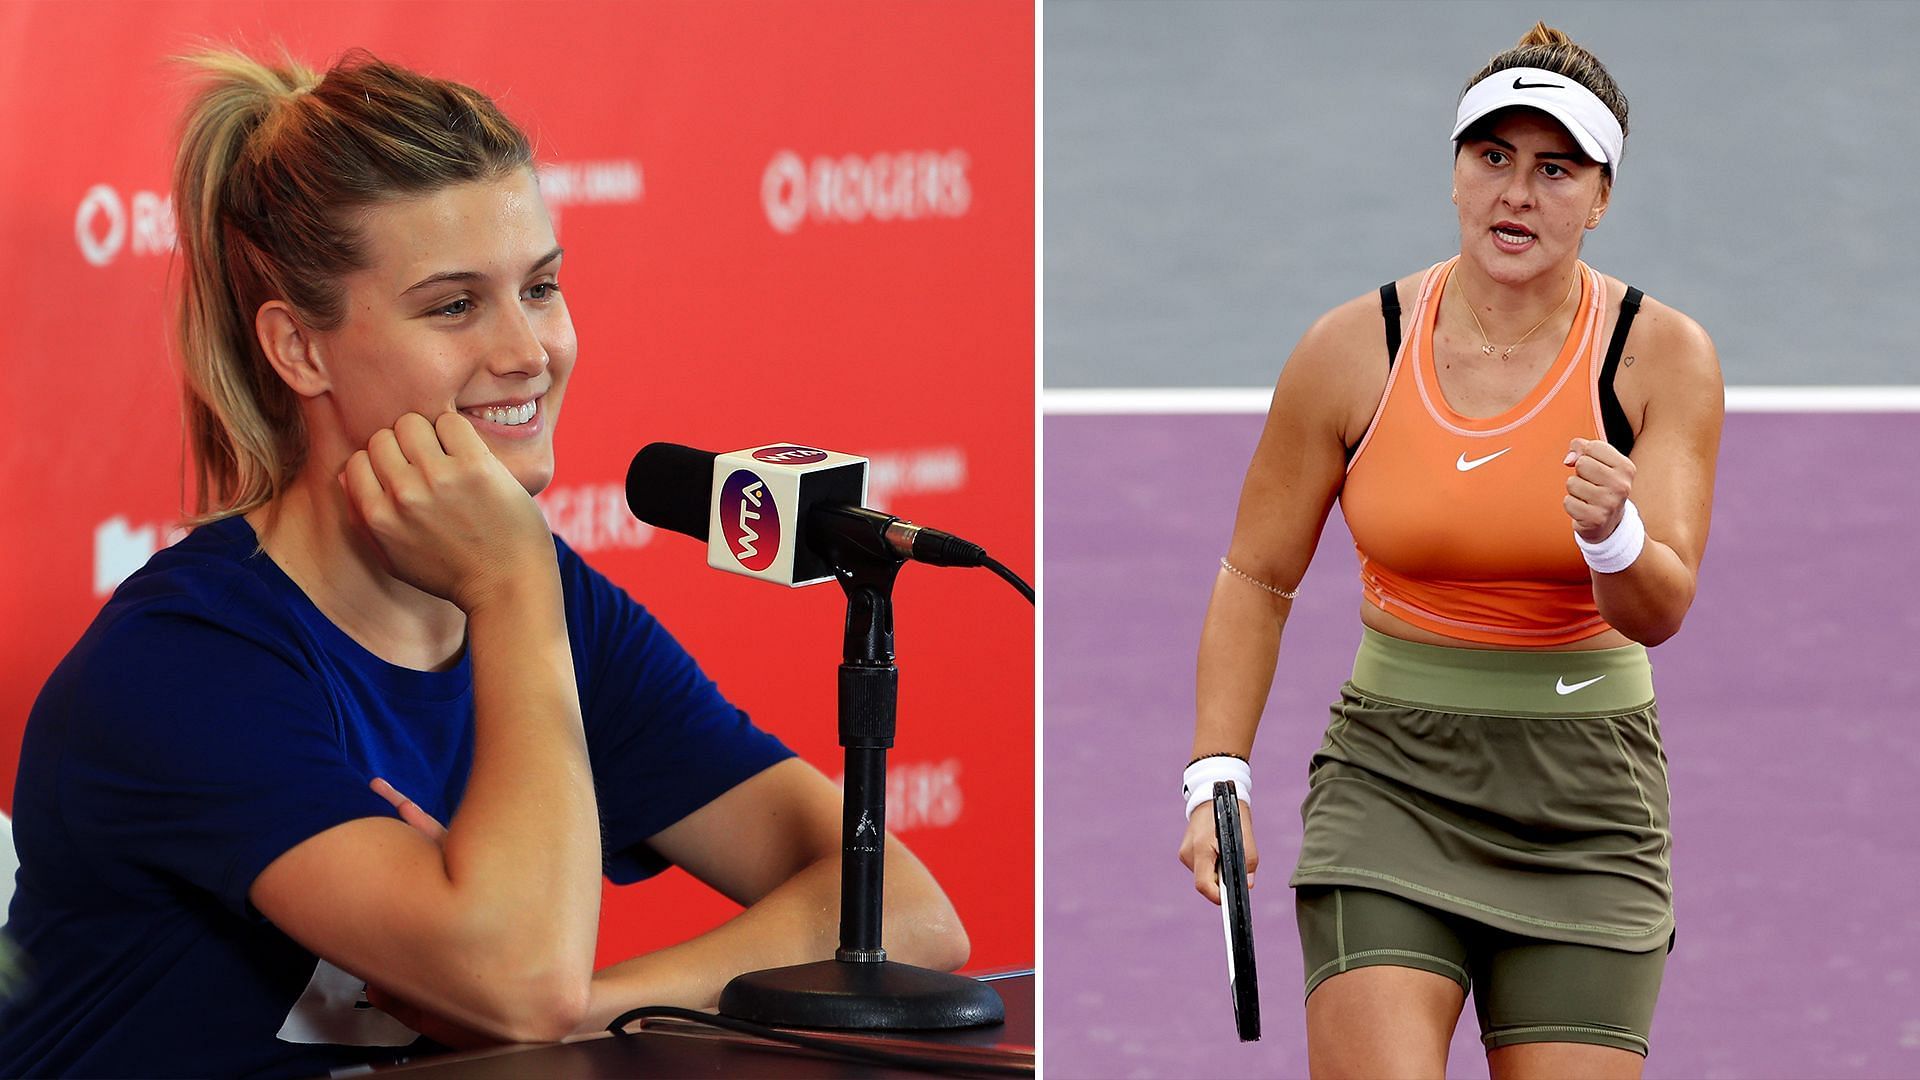 Eugenie Bouchard(left) and Bianca Andreescu(right)